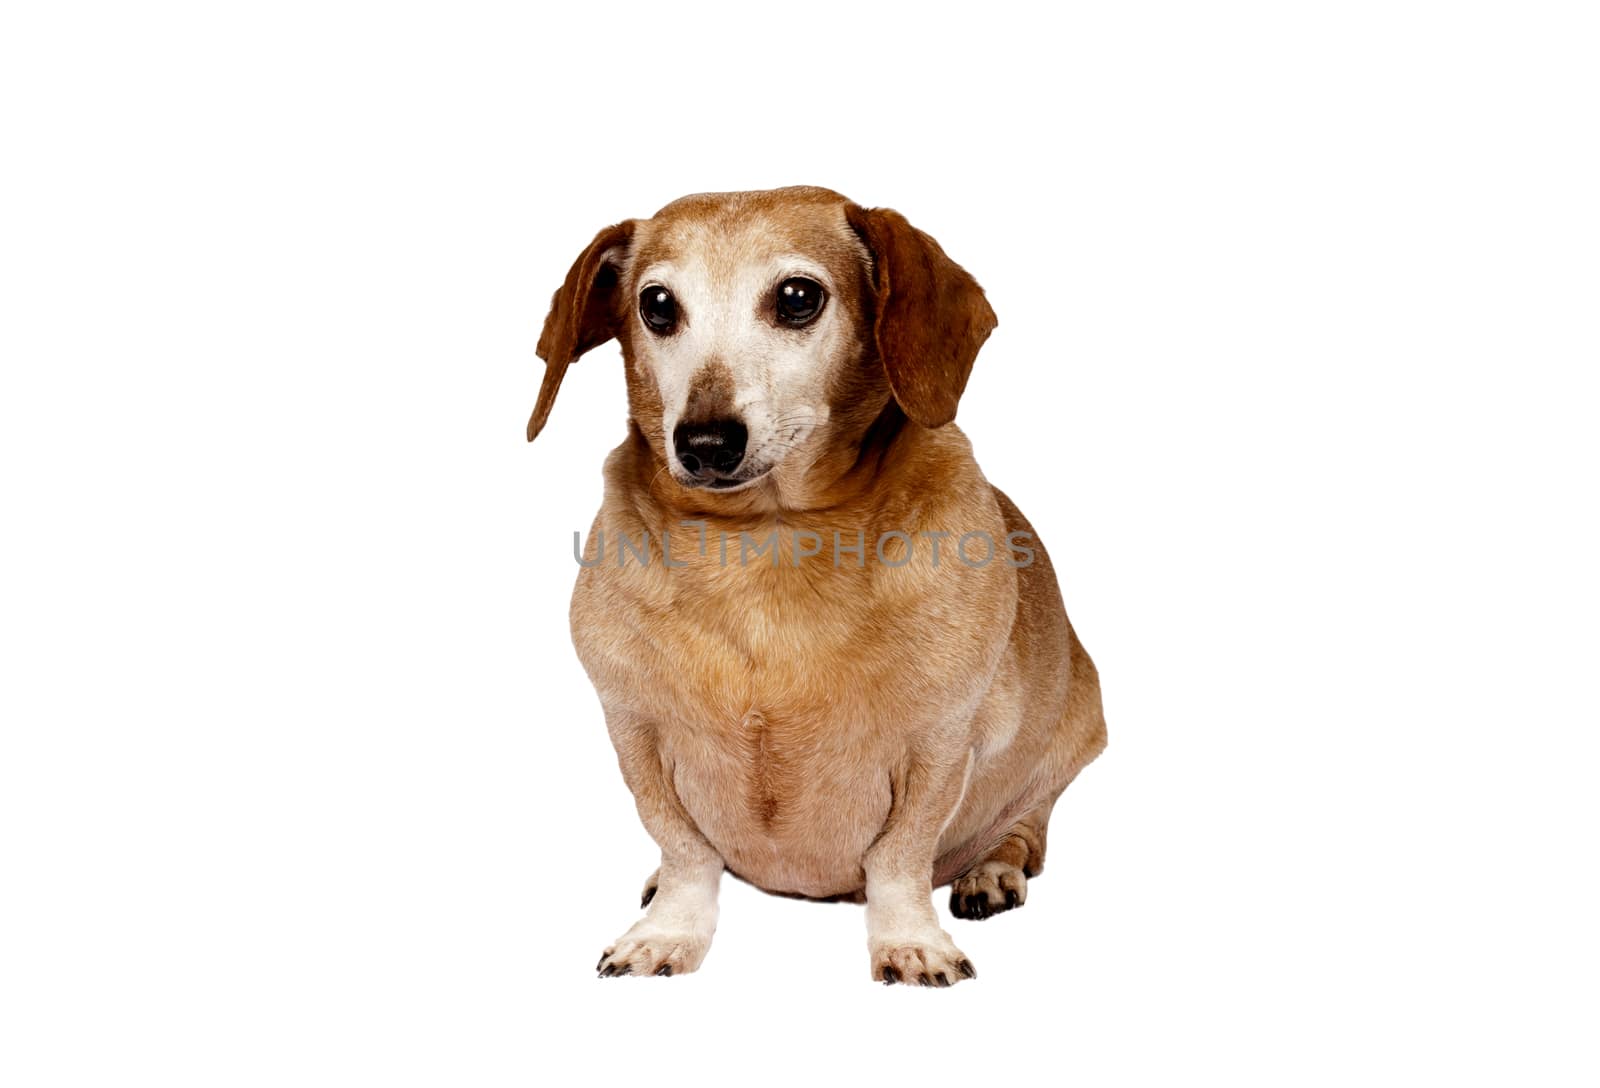 Older dachshund dog sitting down and looking forward.  Isolated on white